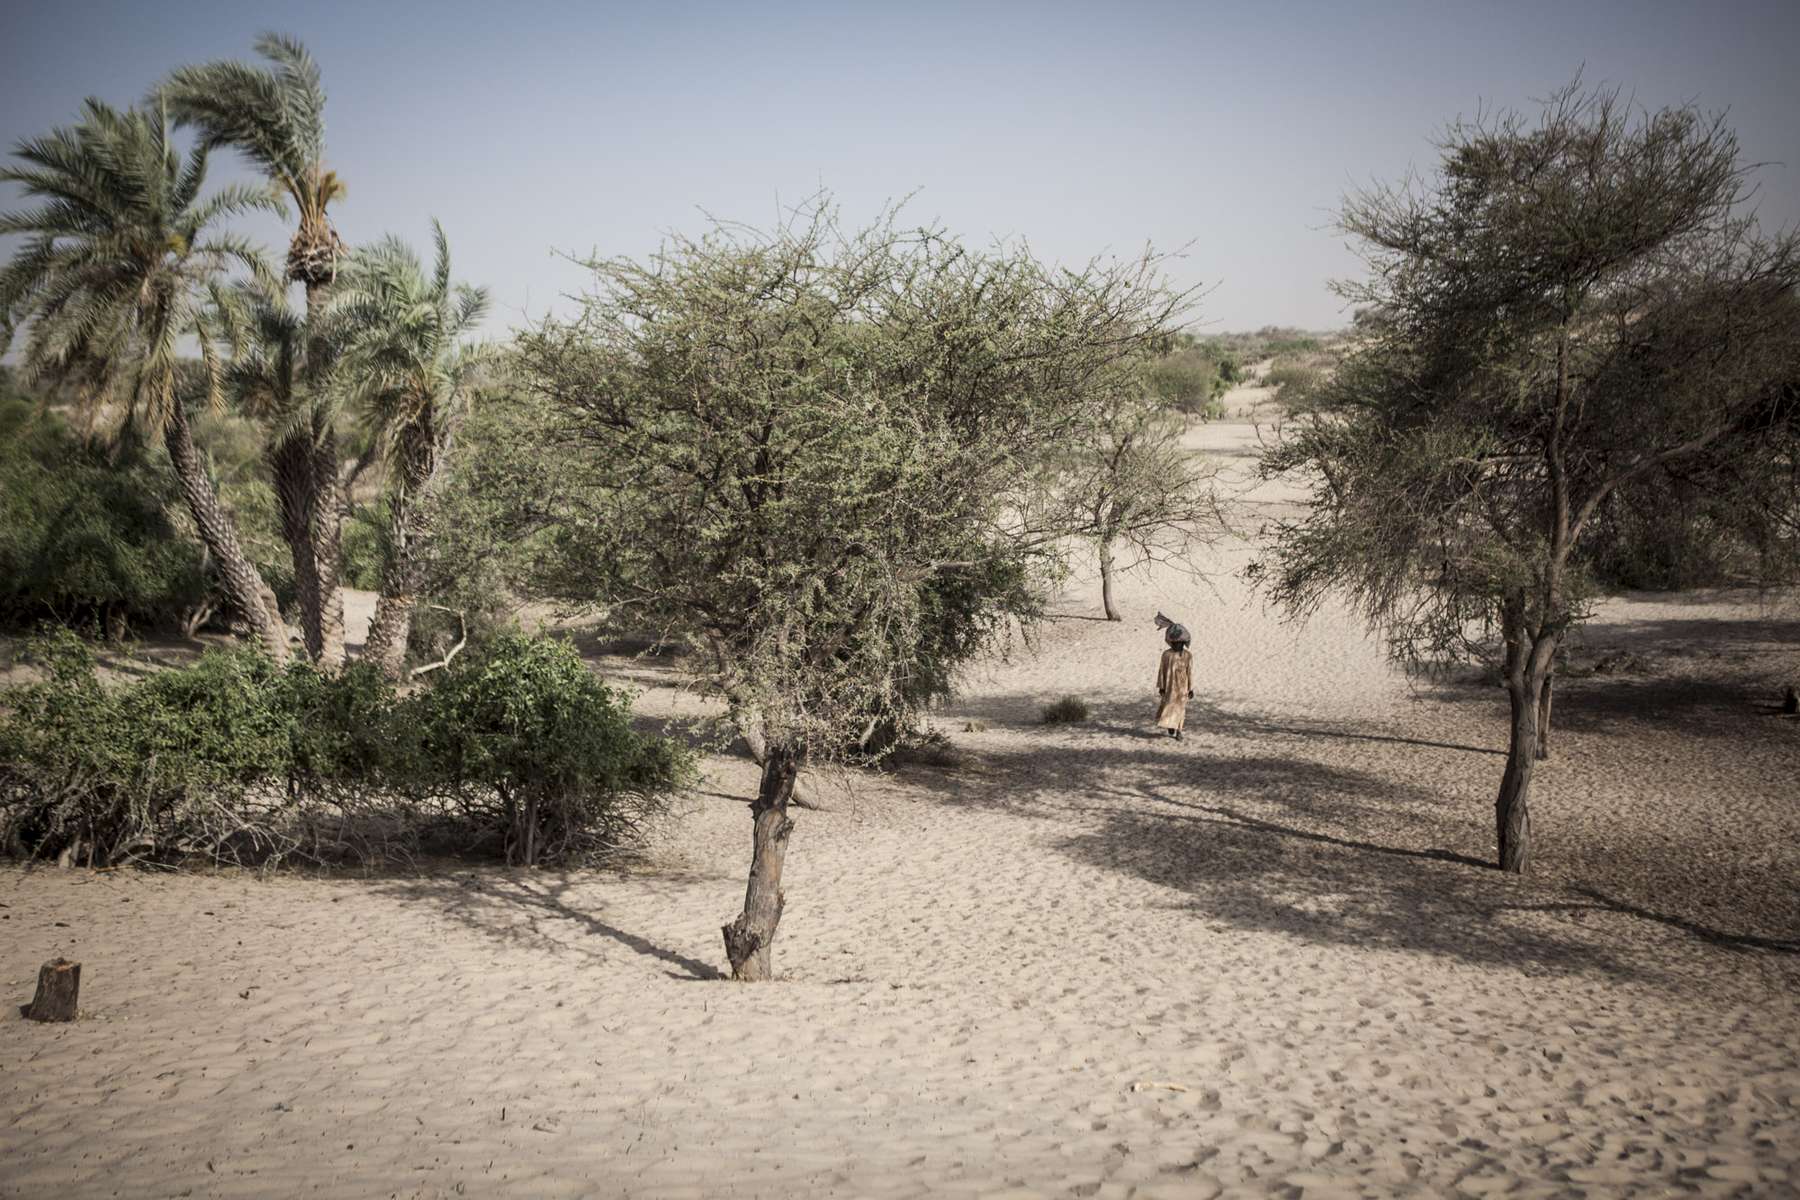 Amadou Allay, 22, walks through an area of the Lake Chad basin that was once covered in water over 30 years ago, but has now been overtaken by sand, in Broumbya Village outside of Baga Sola, Chad February 2017. Villagers recalled building a dyke to separate the water from farmland but as years passed, the farmland began to dry and the shores of the lake began to recede and now all that remain are sand and desert succulents. Present day Broumbya Village lies over 4km away from the shores of the lake and the distance continues to grow as the desert encroaches the basin. Due to recent security constraints villagers cannot move to find new farmland therefore they must rely on irregular food distributions from under funded aid organizations. 